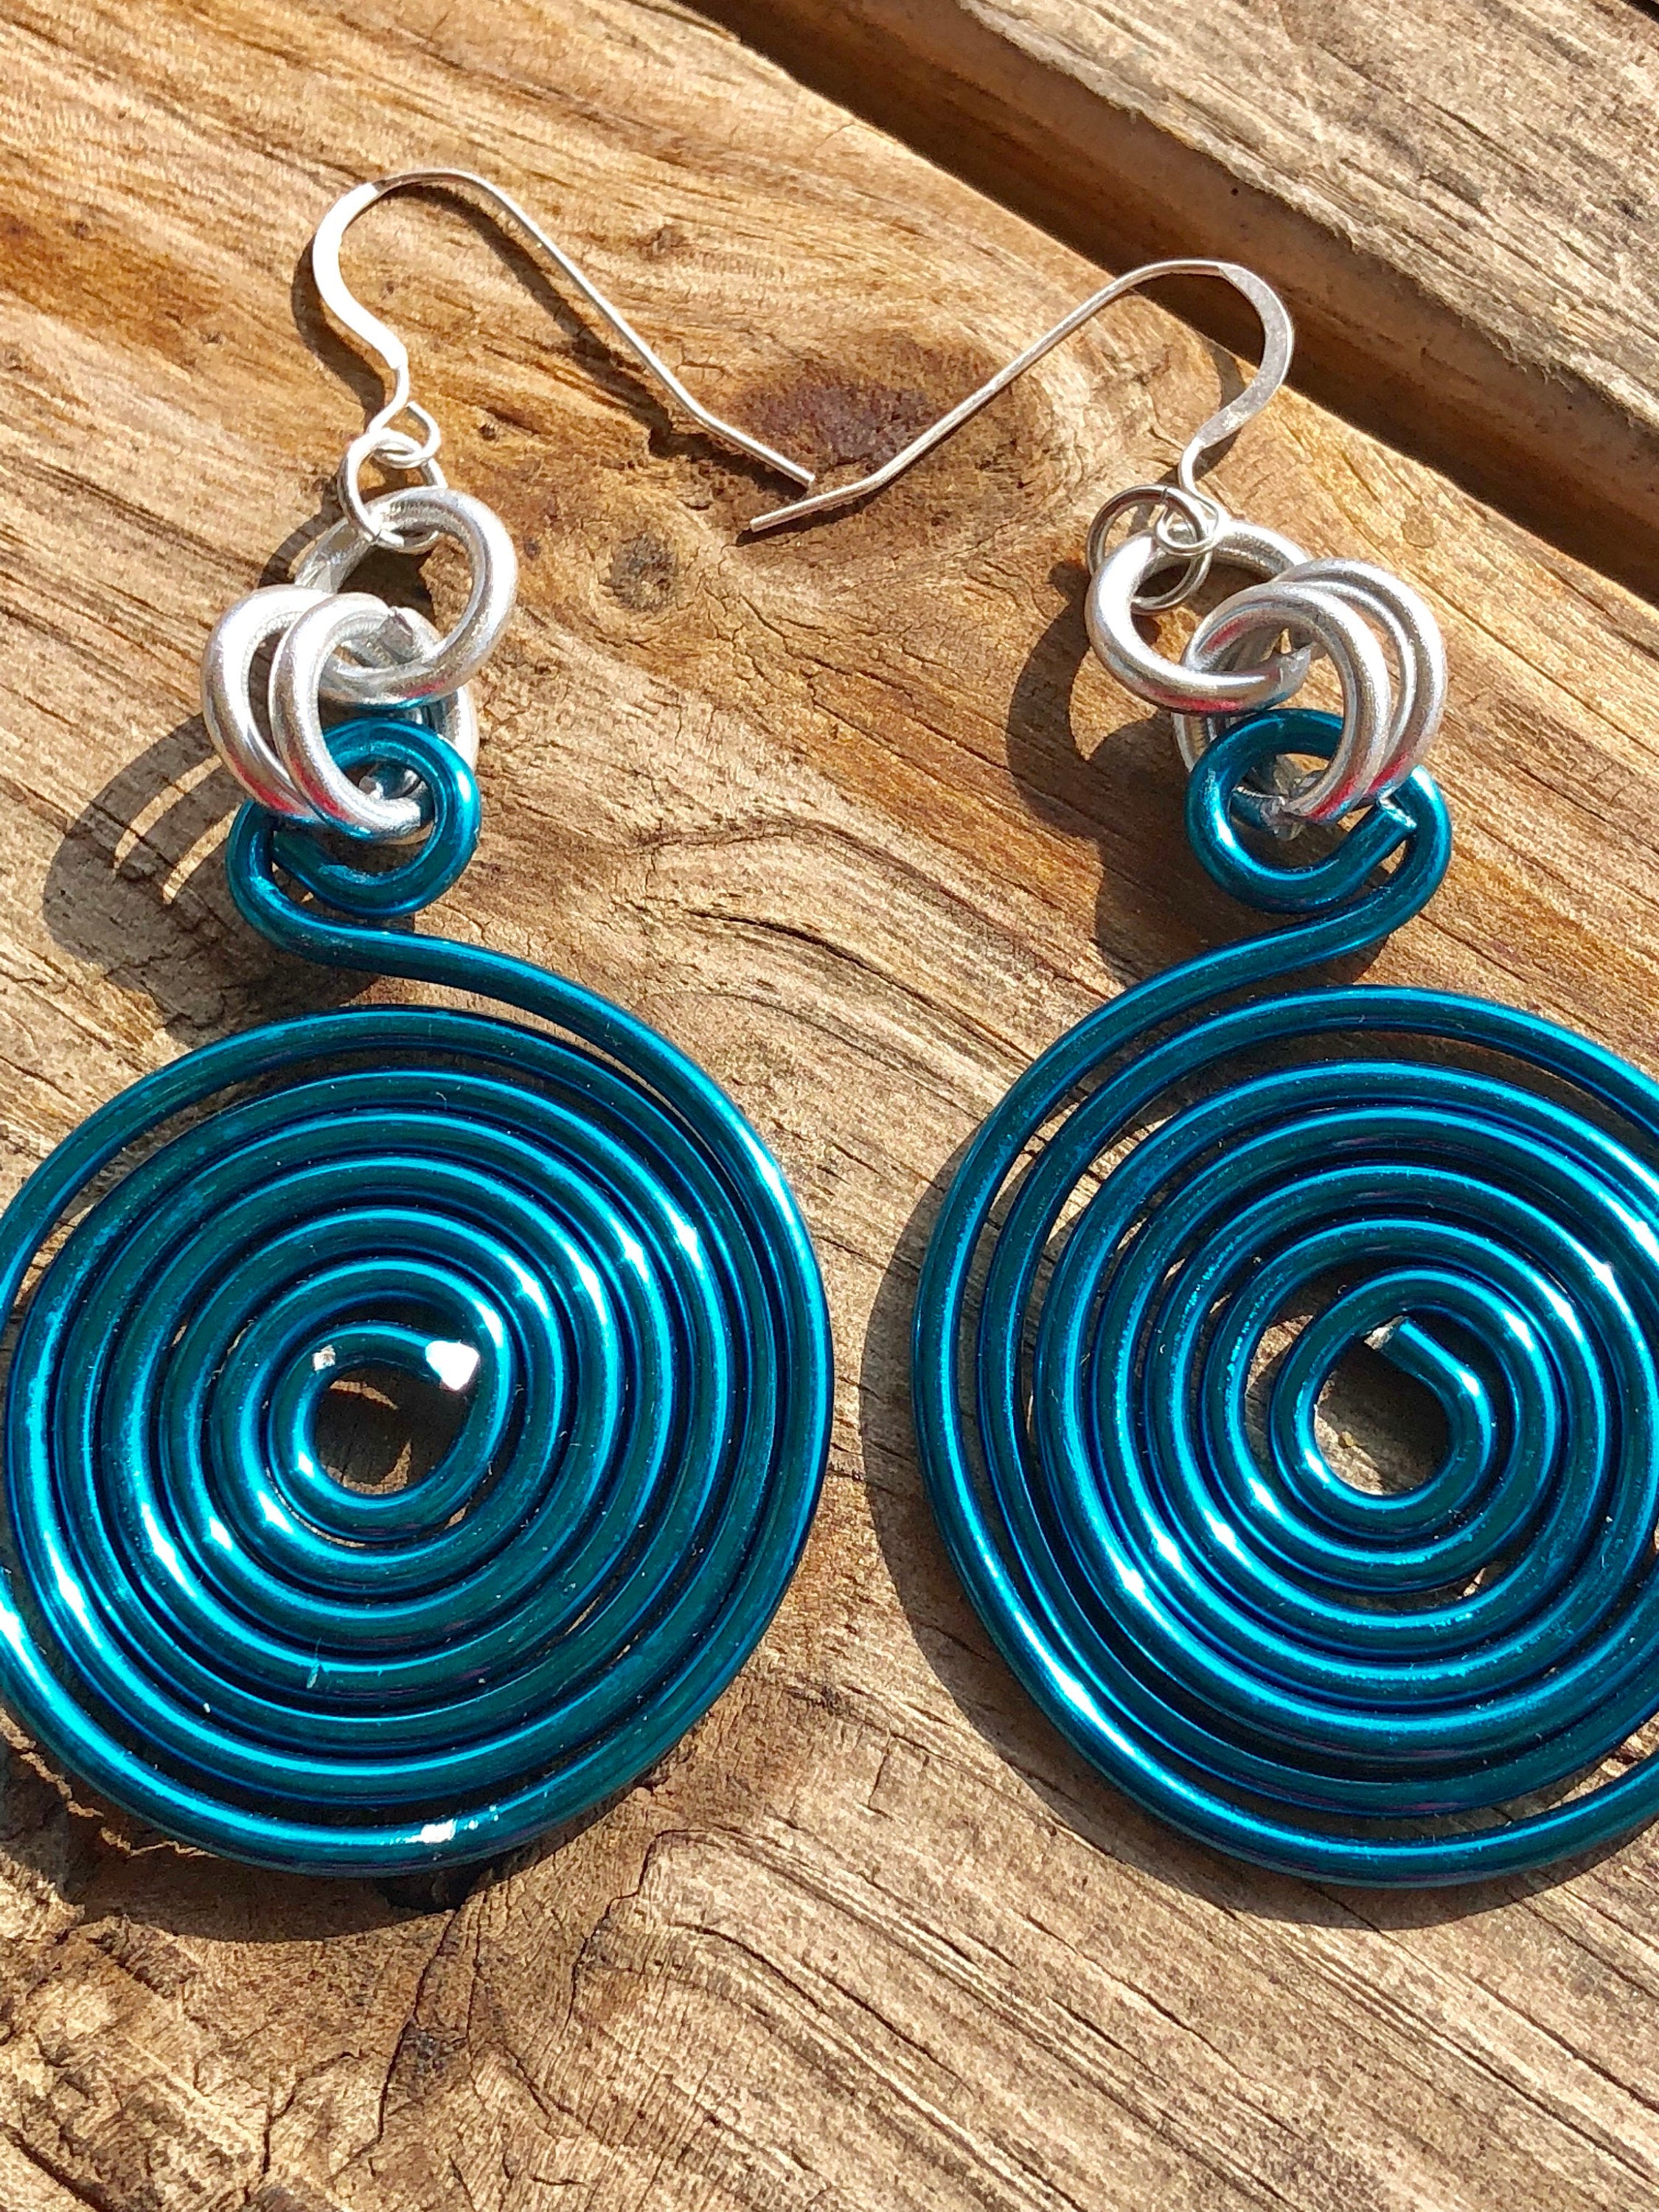 Round Turquoise Earrings, light weight aluminum wire with sterling silver ear wire